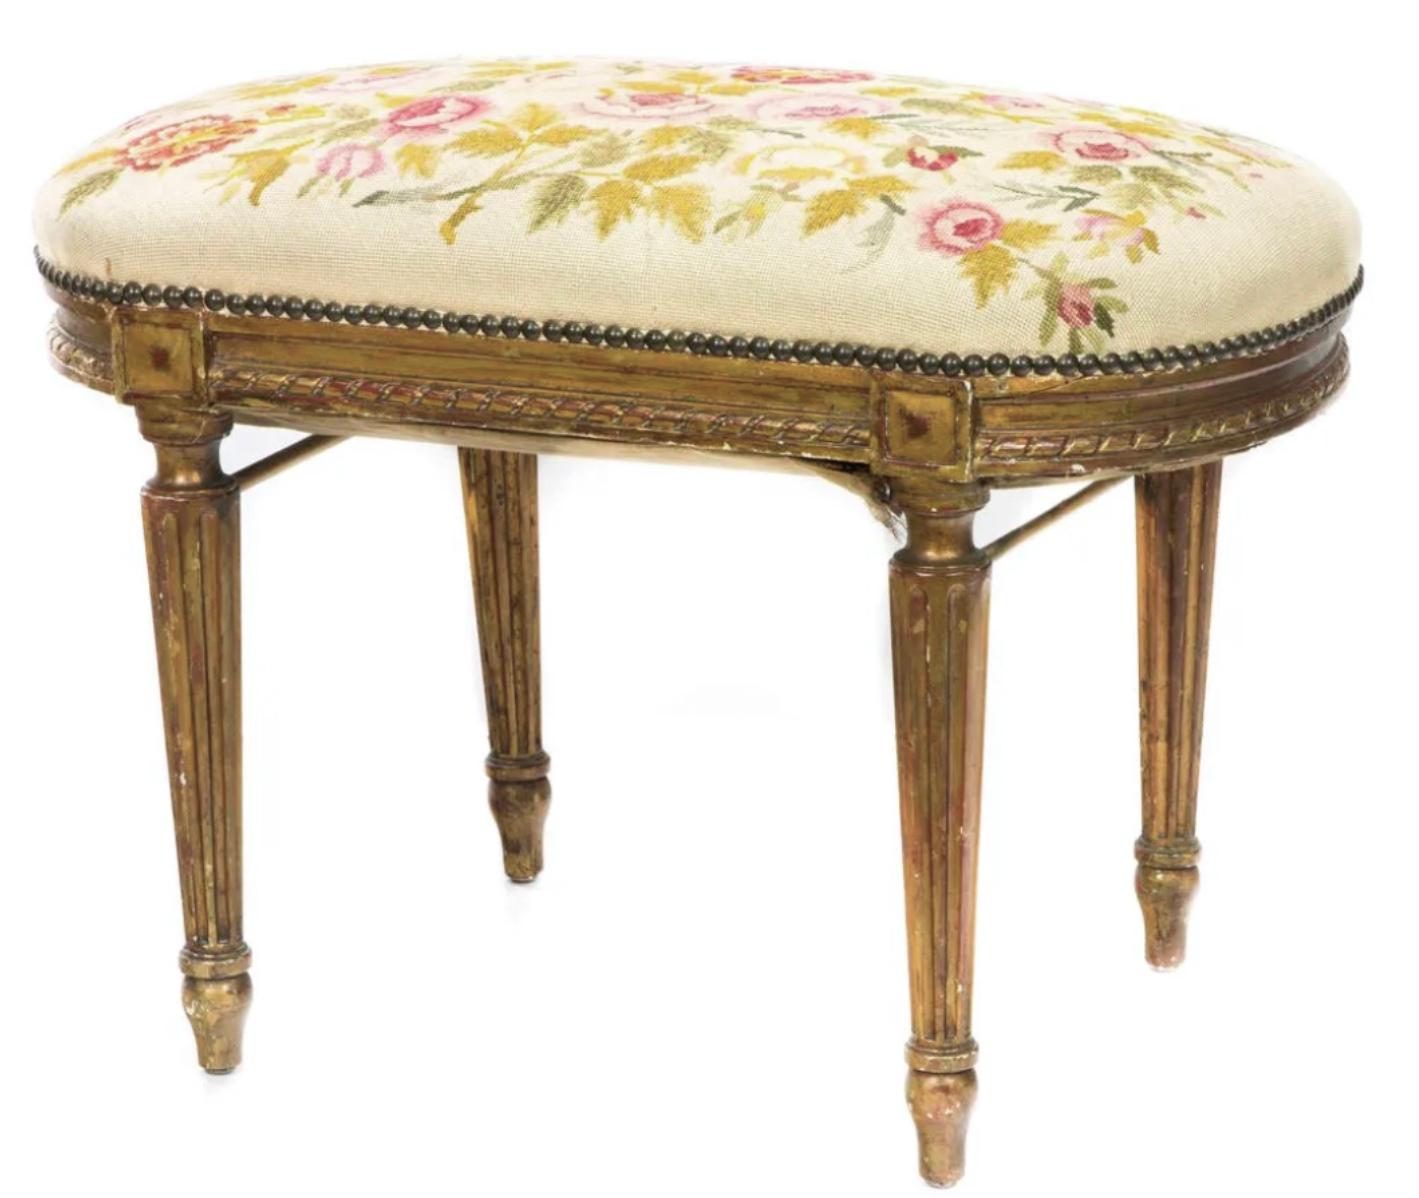 A Louis XVI style giltwood tabouret, late 19th century, having a needlework top, above ribbon carved and fluted legs. Wonderful old warm patina to the surface.